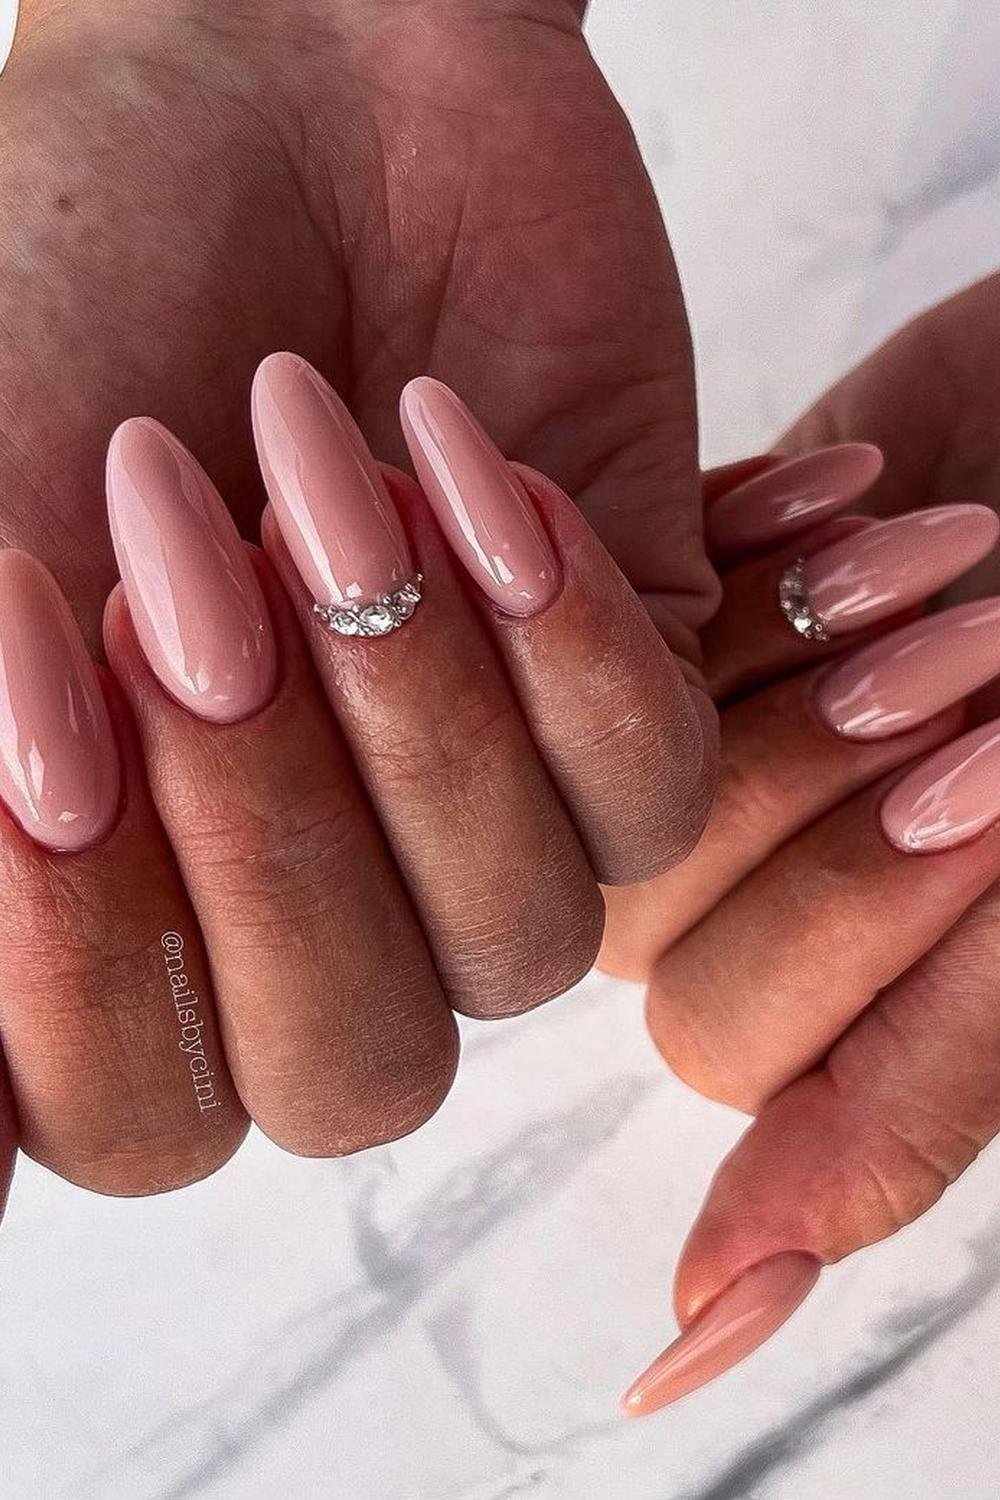 13 - Picture of Nude Nails